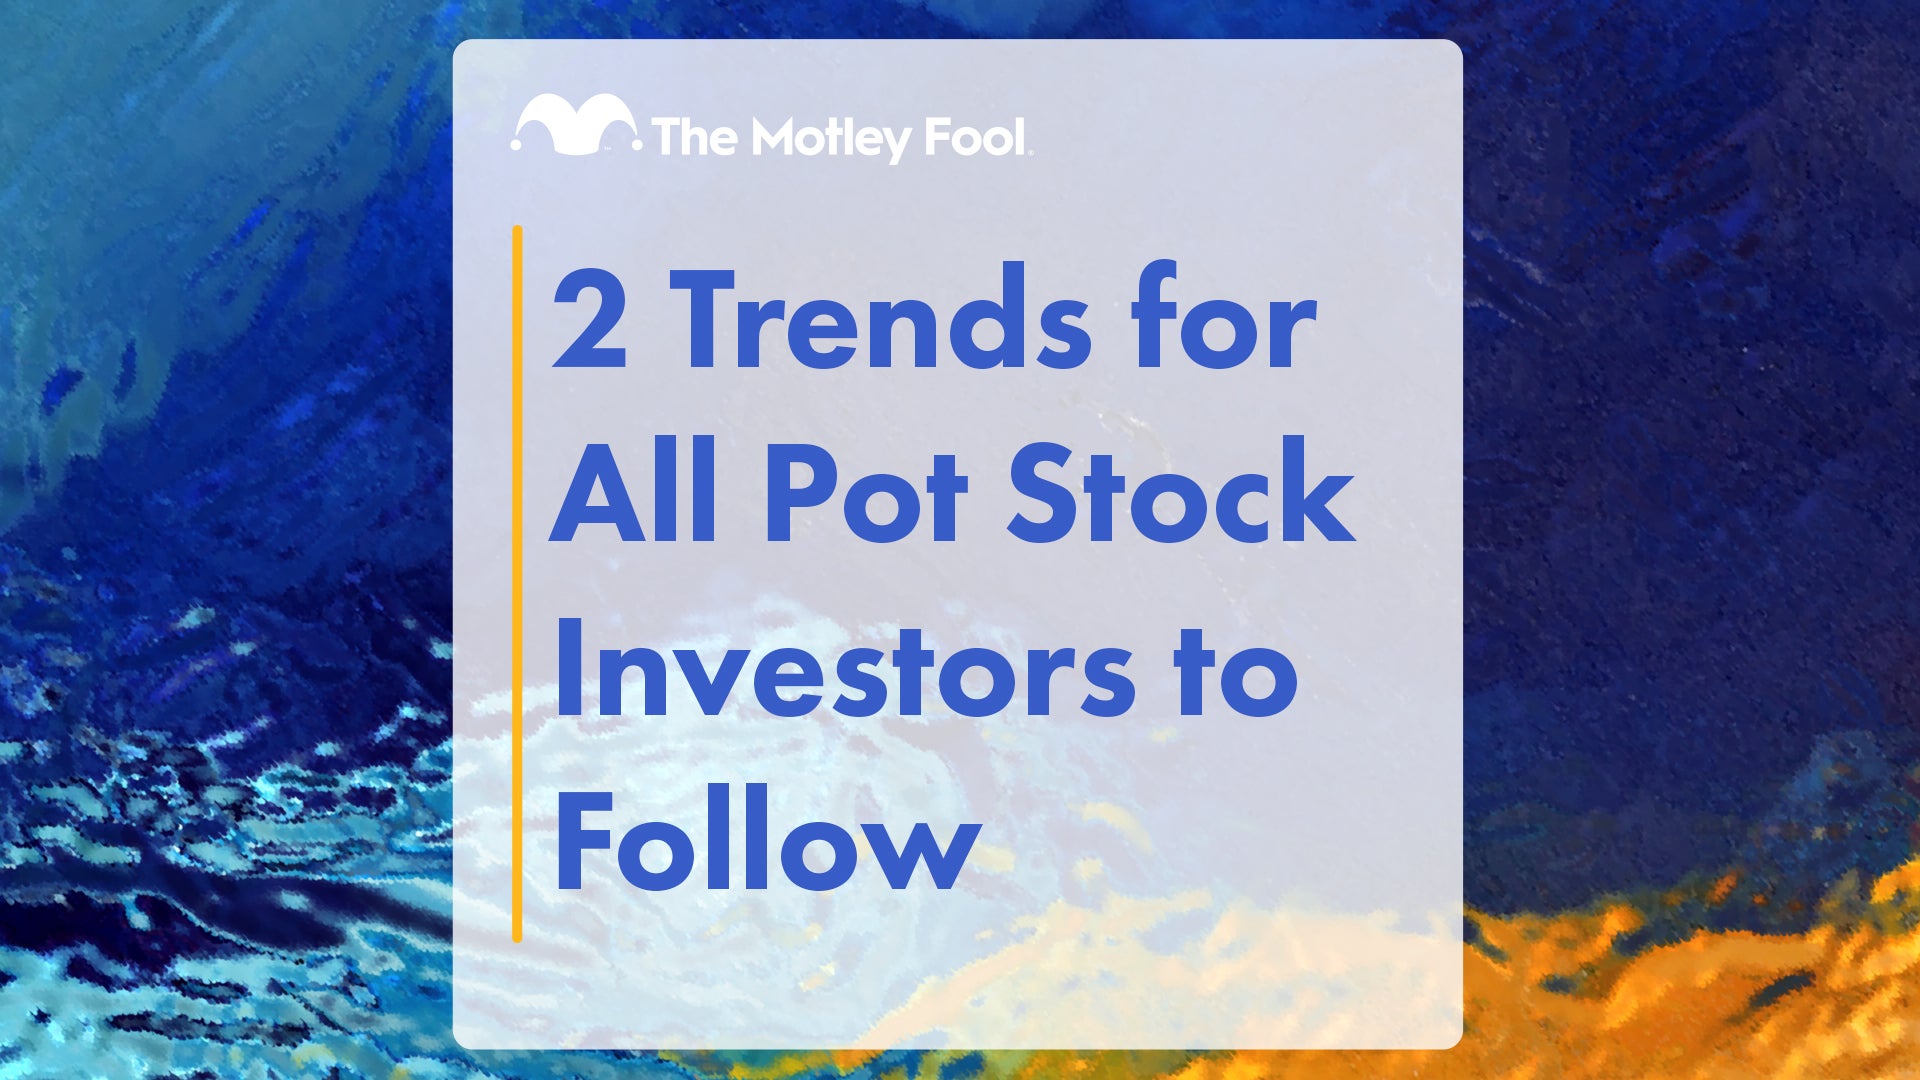 2 Trends for All Pot Stock Investors to Follow